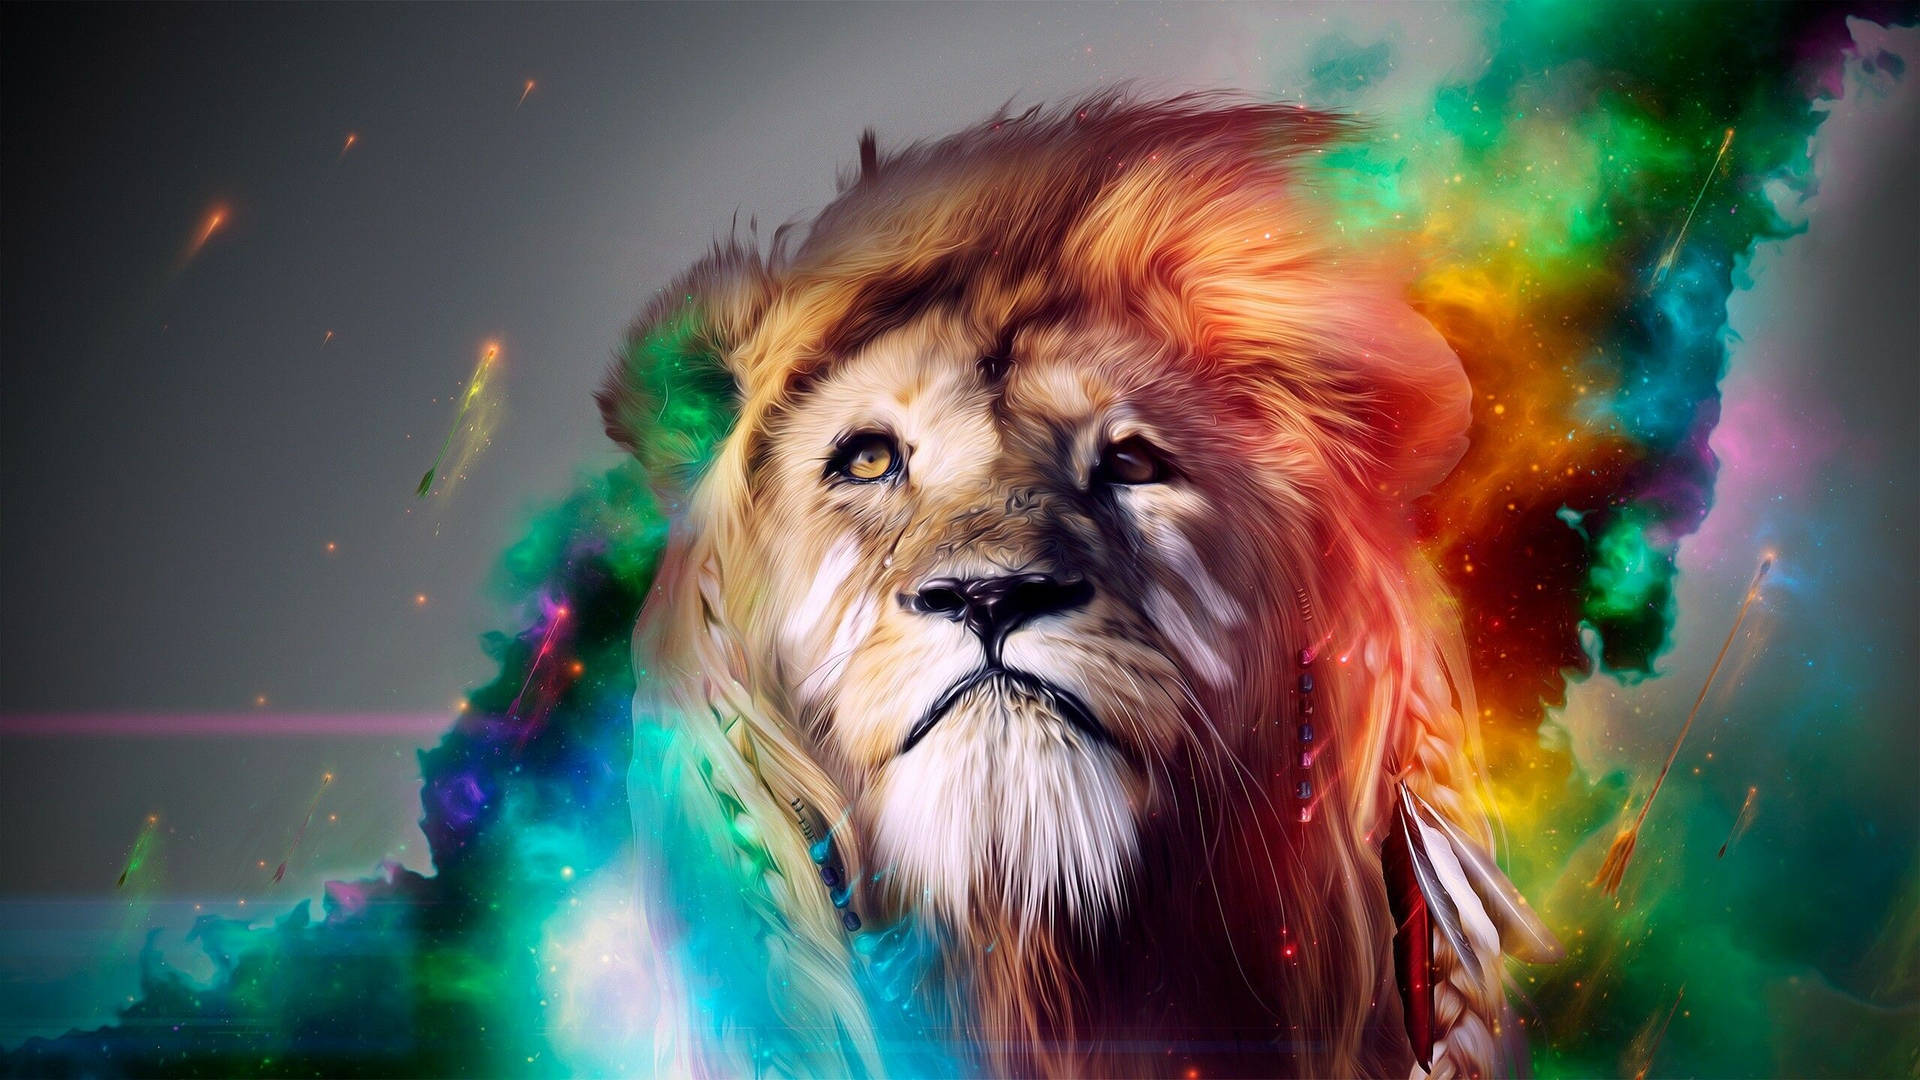 Cool Picture Art Of Lion Wallpaper